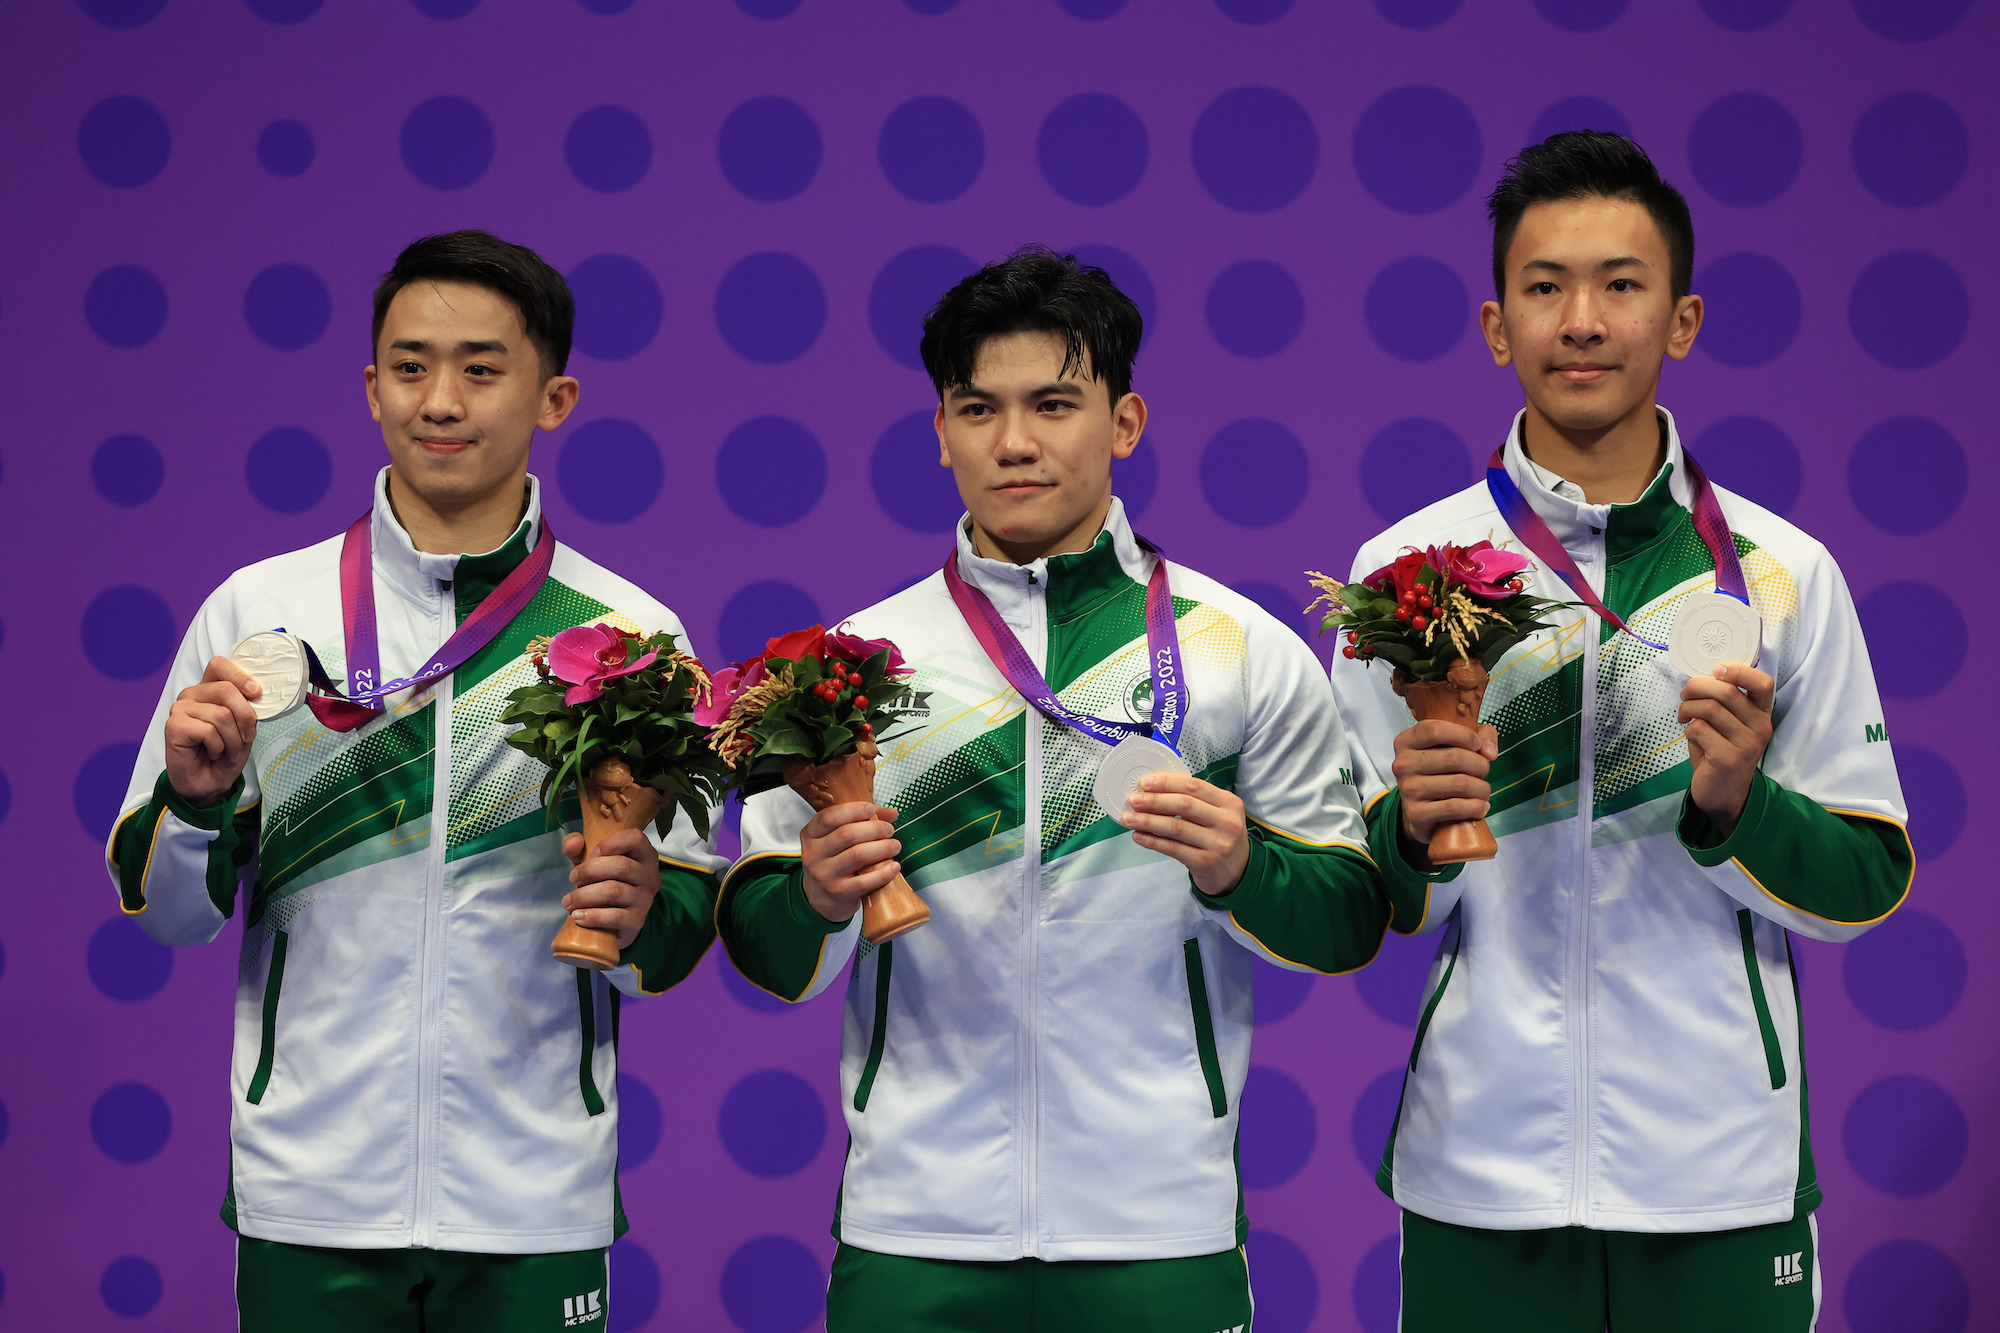 The Macao men’s karate team won a silver medal on the final day of the Asian Games